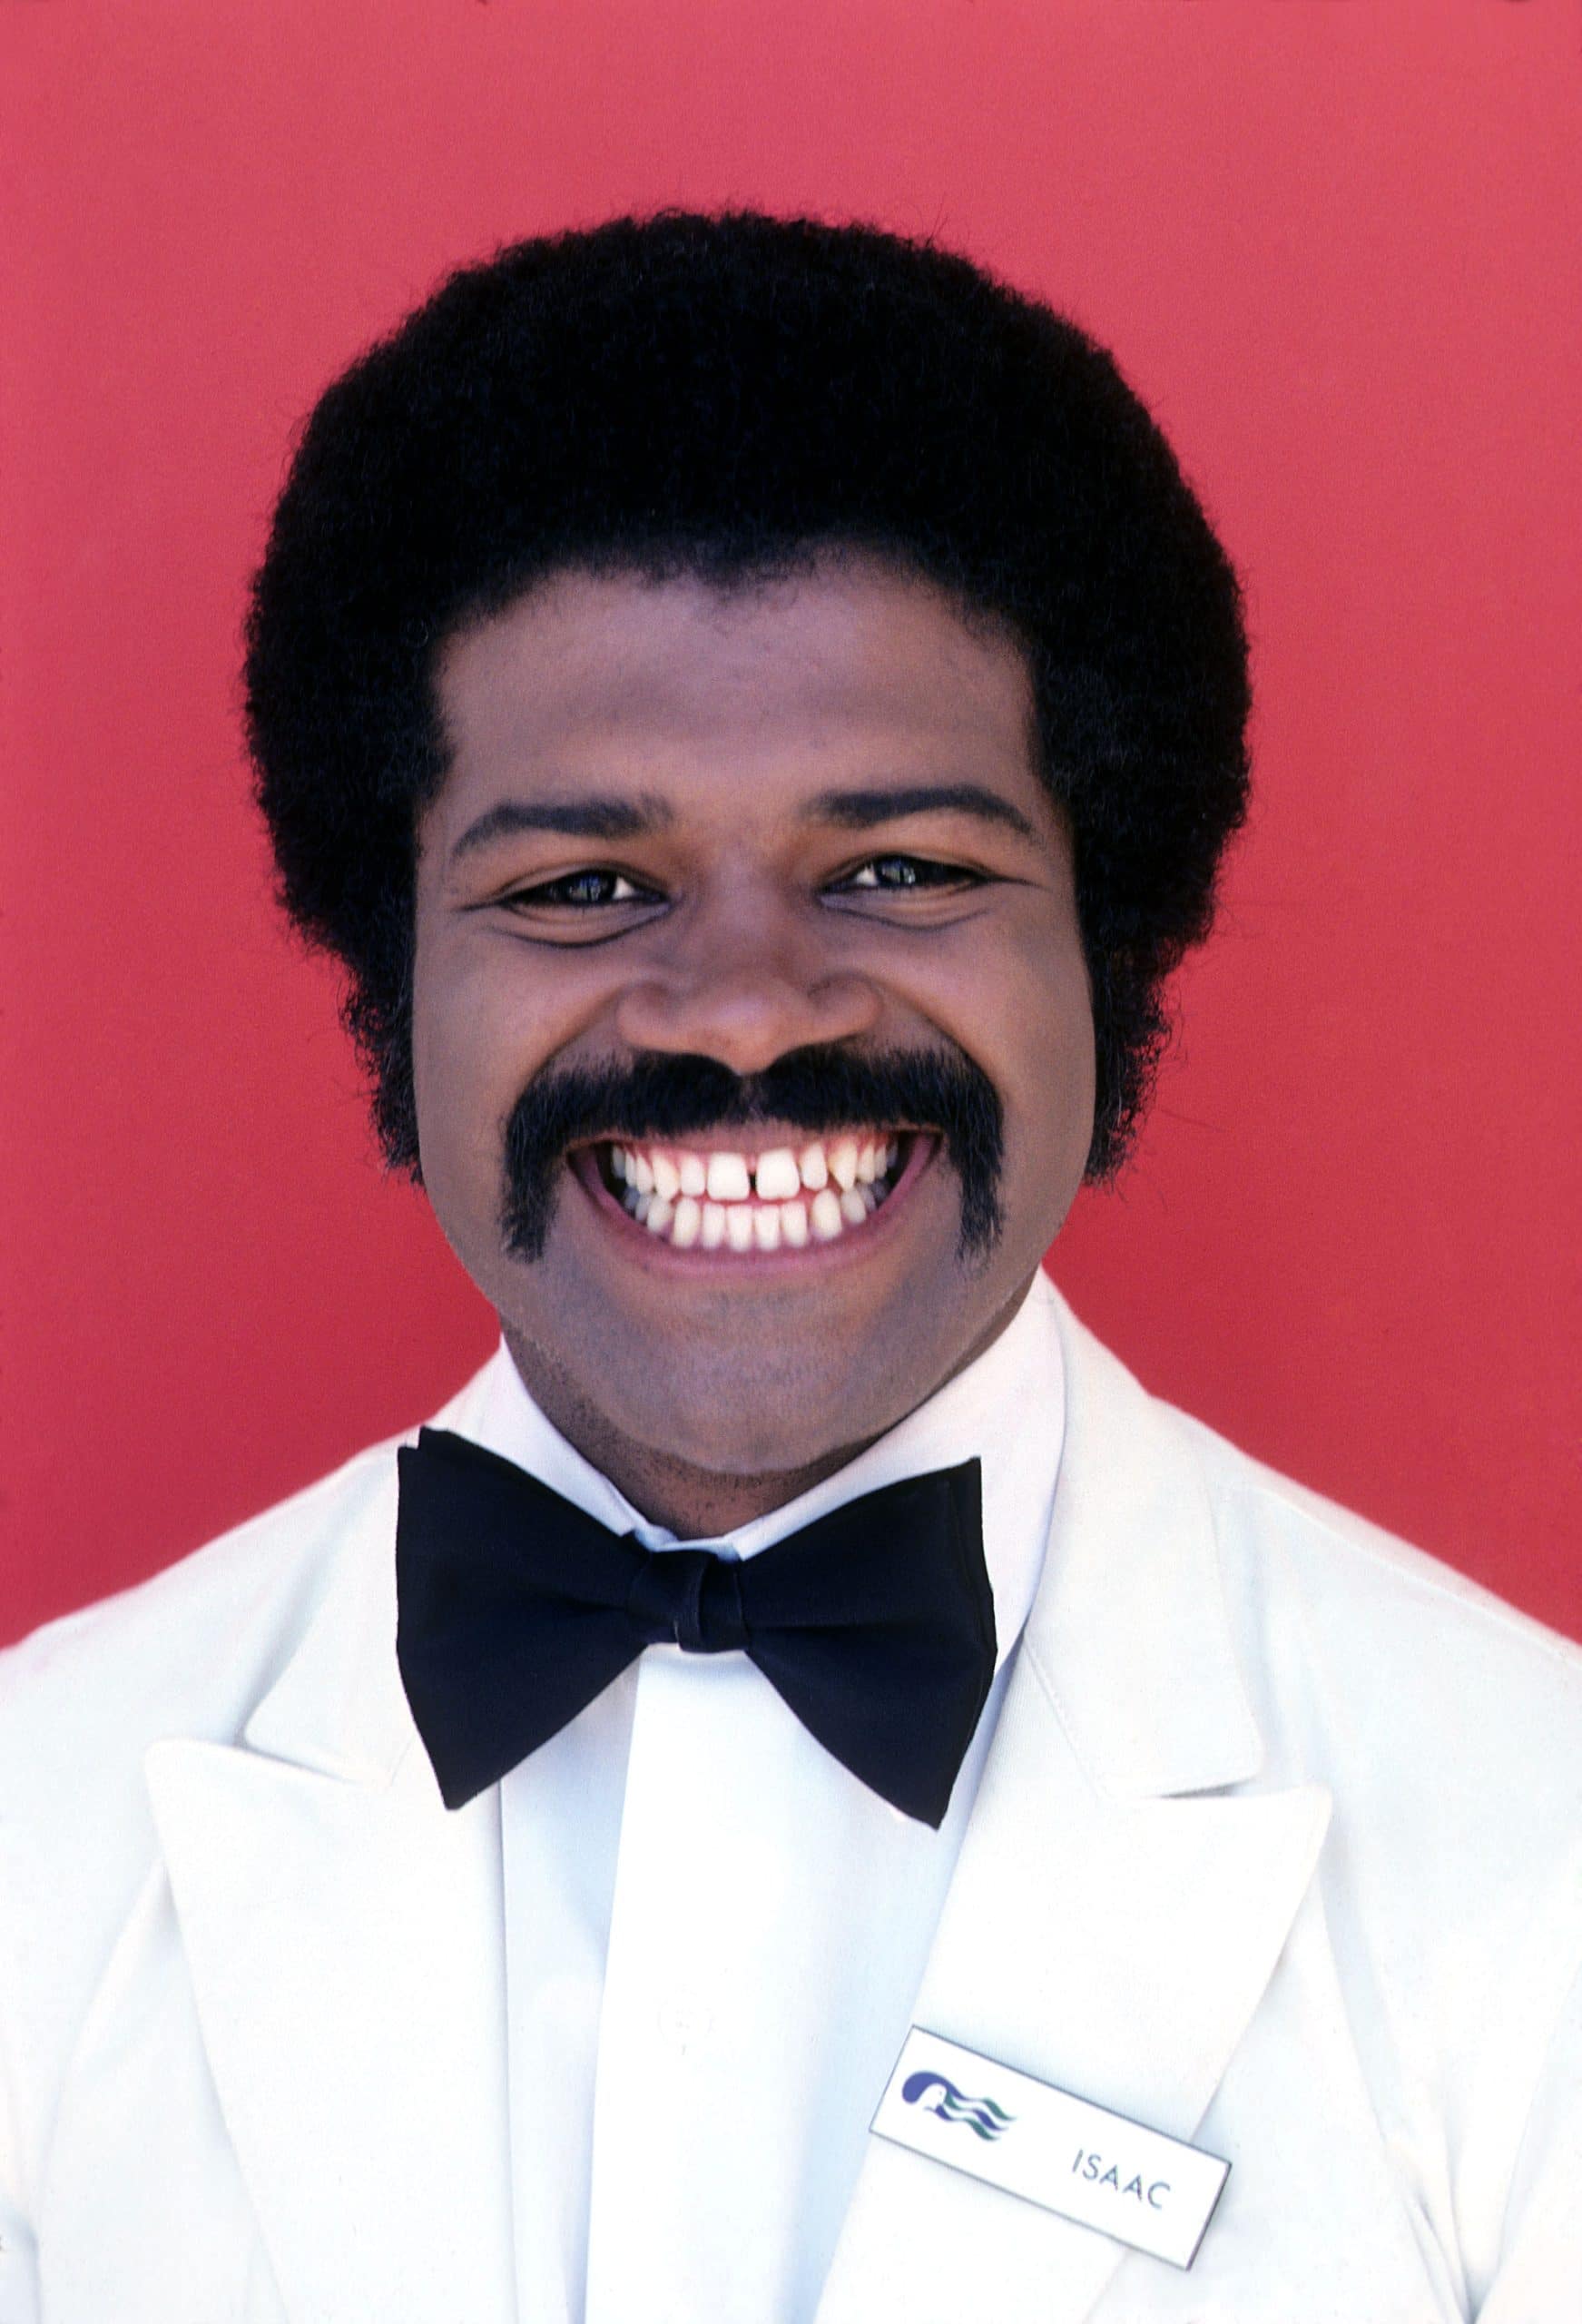 THE LOVE BOAT, Ted Lange, 1977-1986